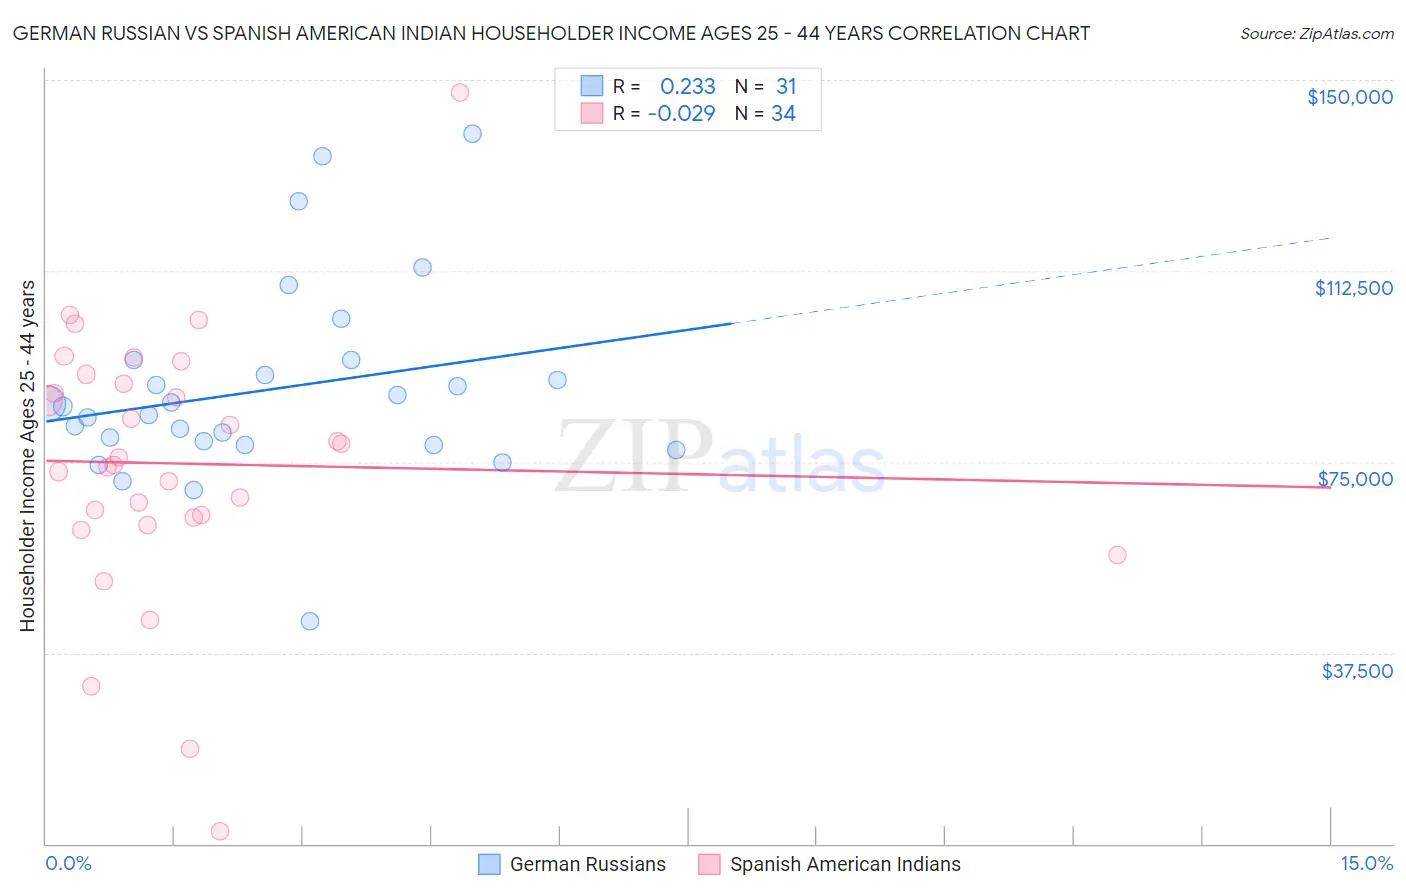 German Russian vs Spanish American Indian Householder Income Ages 25 - 44 years